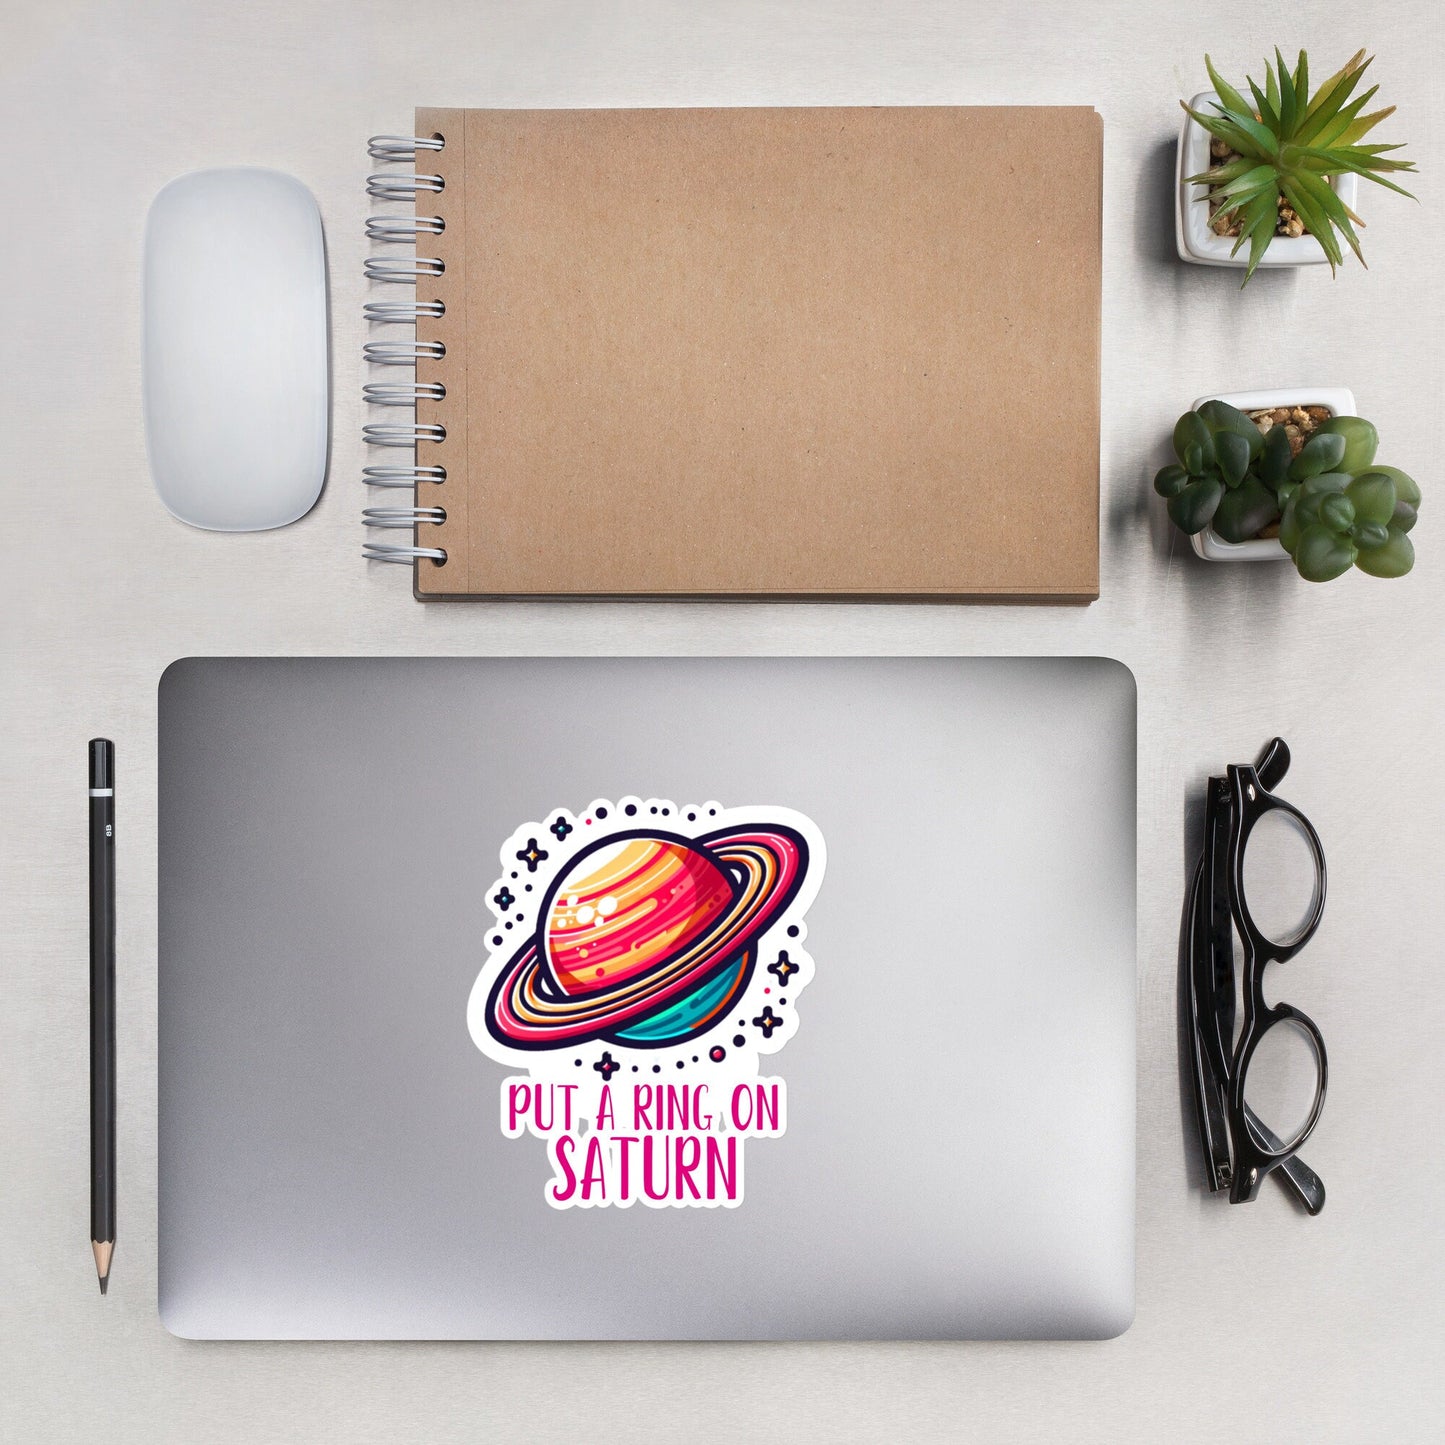 Put a ring on saturn Sticker Astronomy Sticker Science Stickers Astronomy Humor Bubble-free stickers